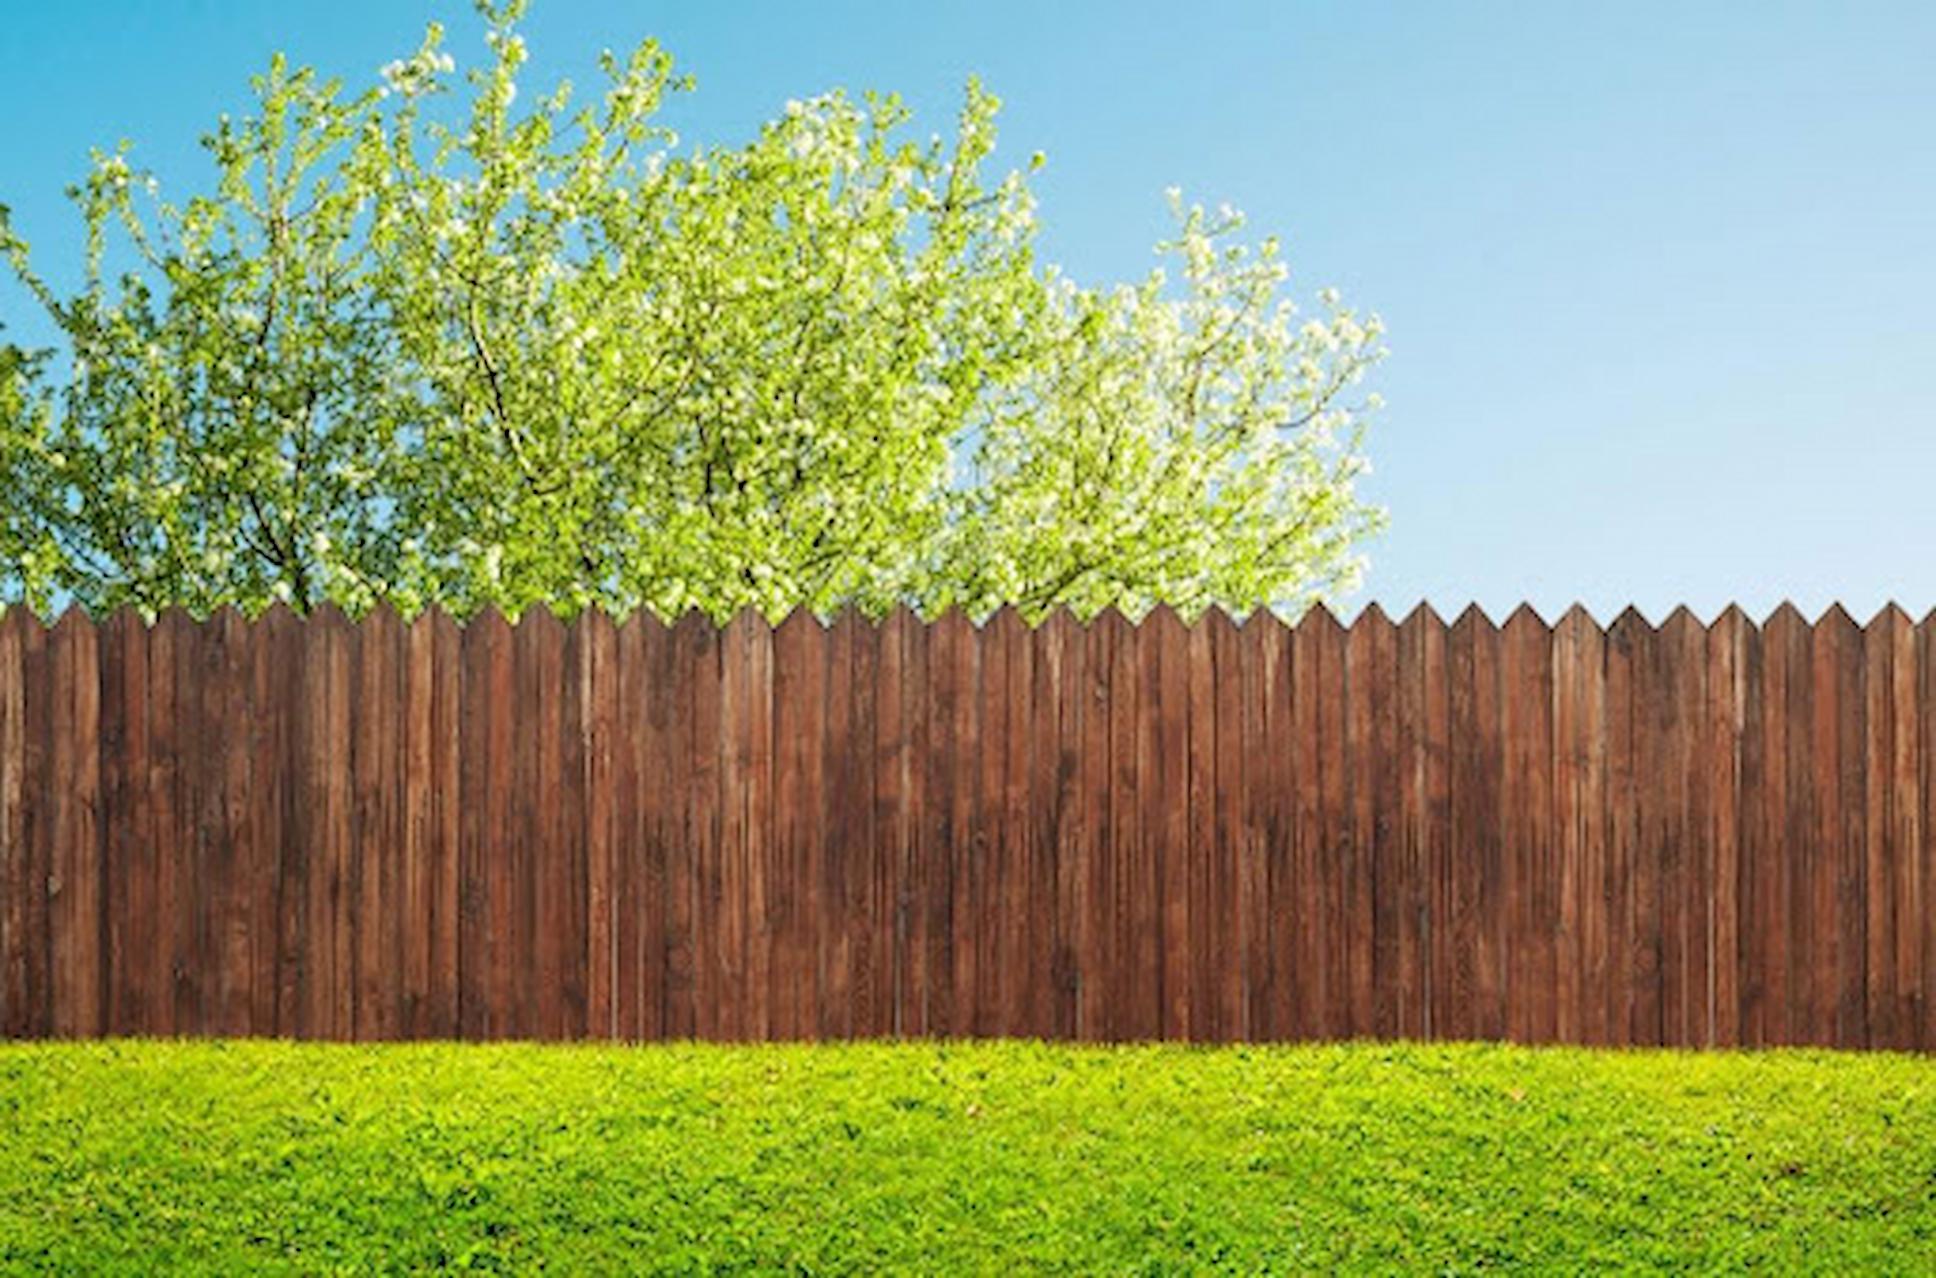 Why Is It Necessary To Fence Your Property To Protect Your Family?